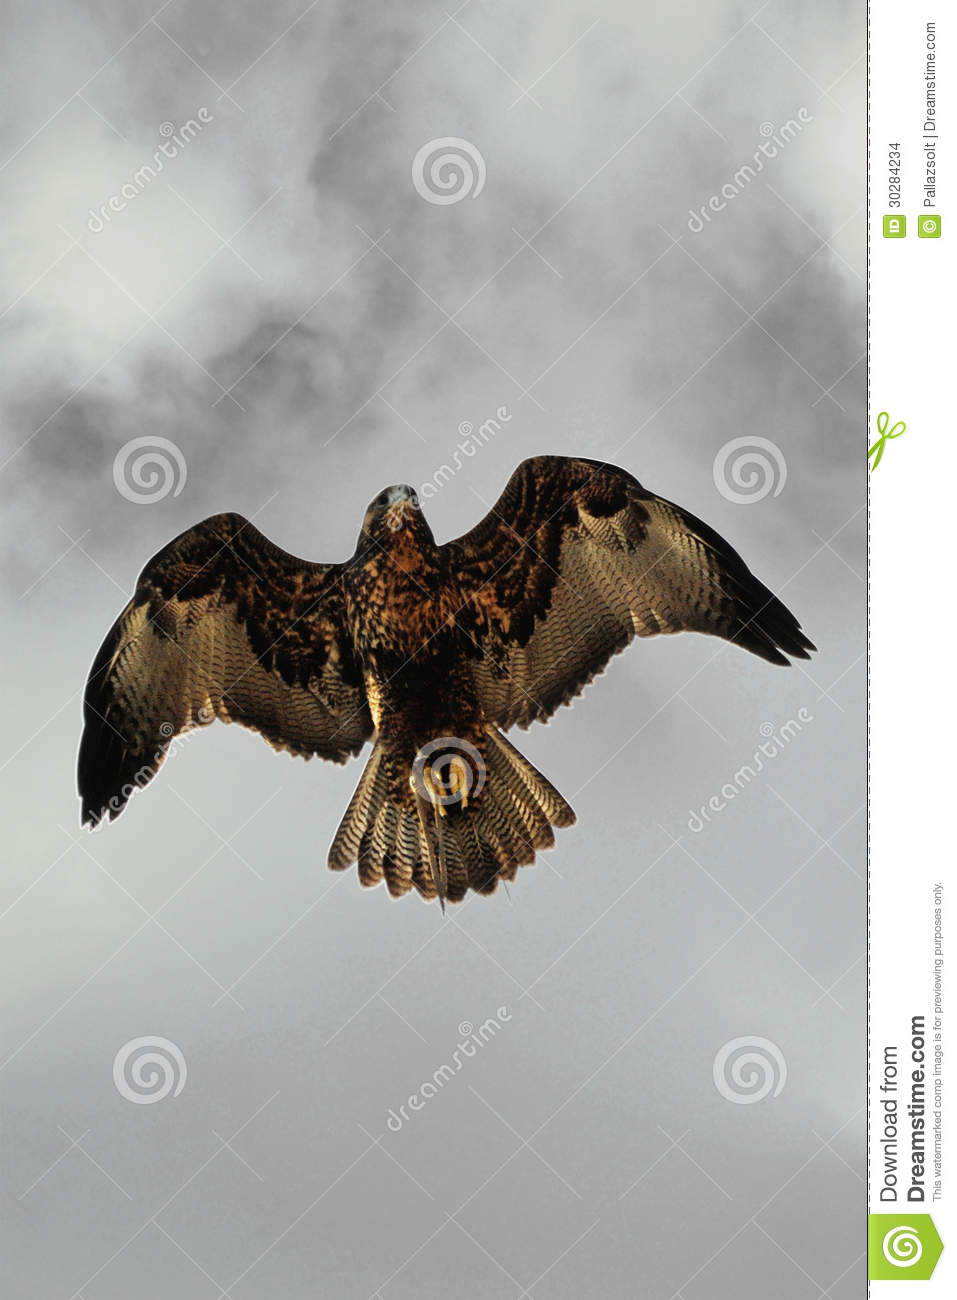 Eagle In Black Clouds Stock Images   Image  30284234